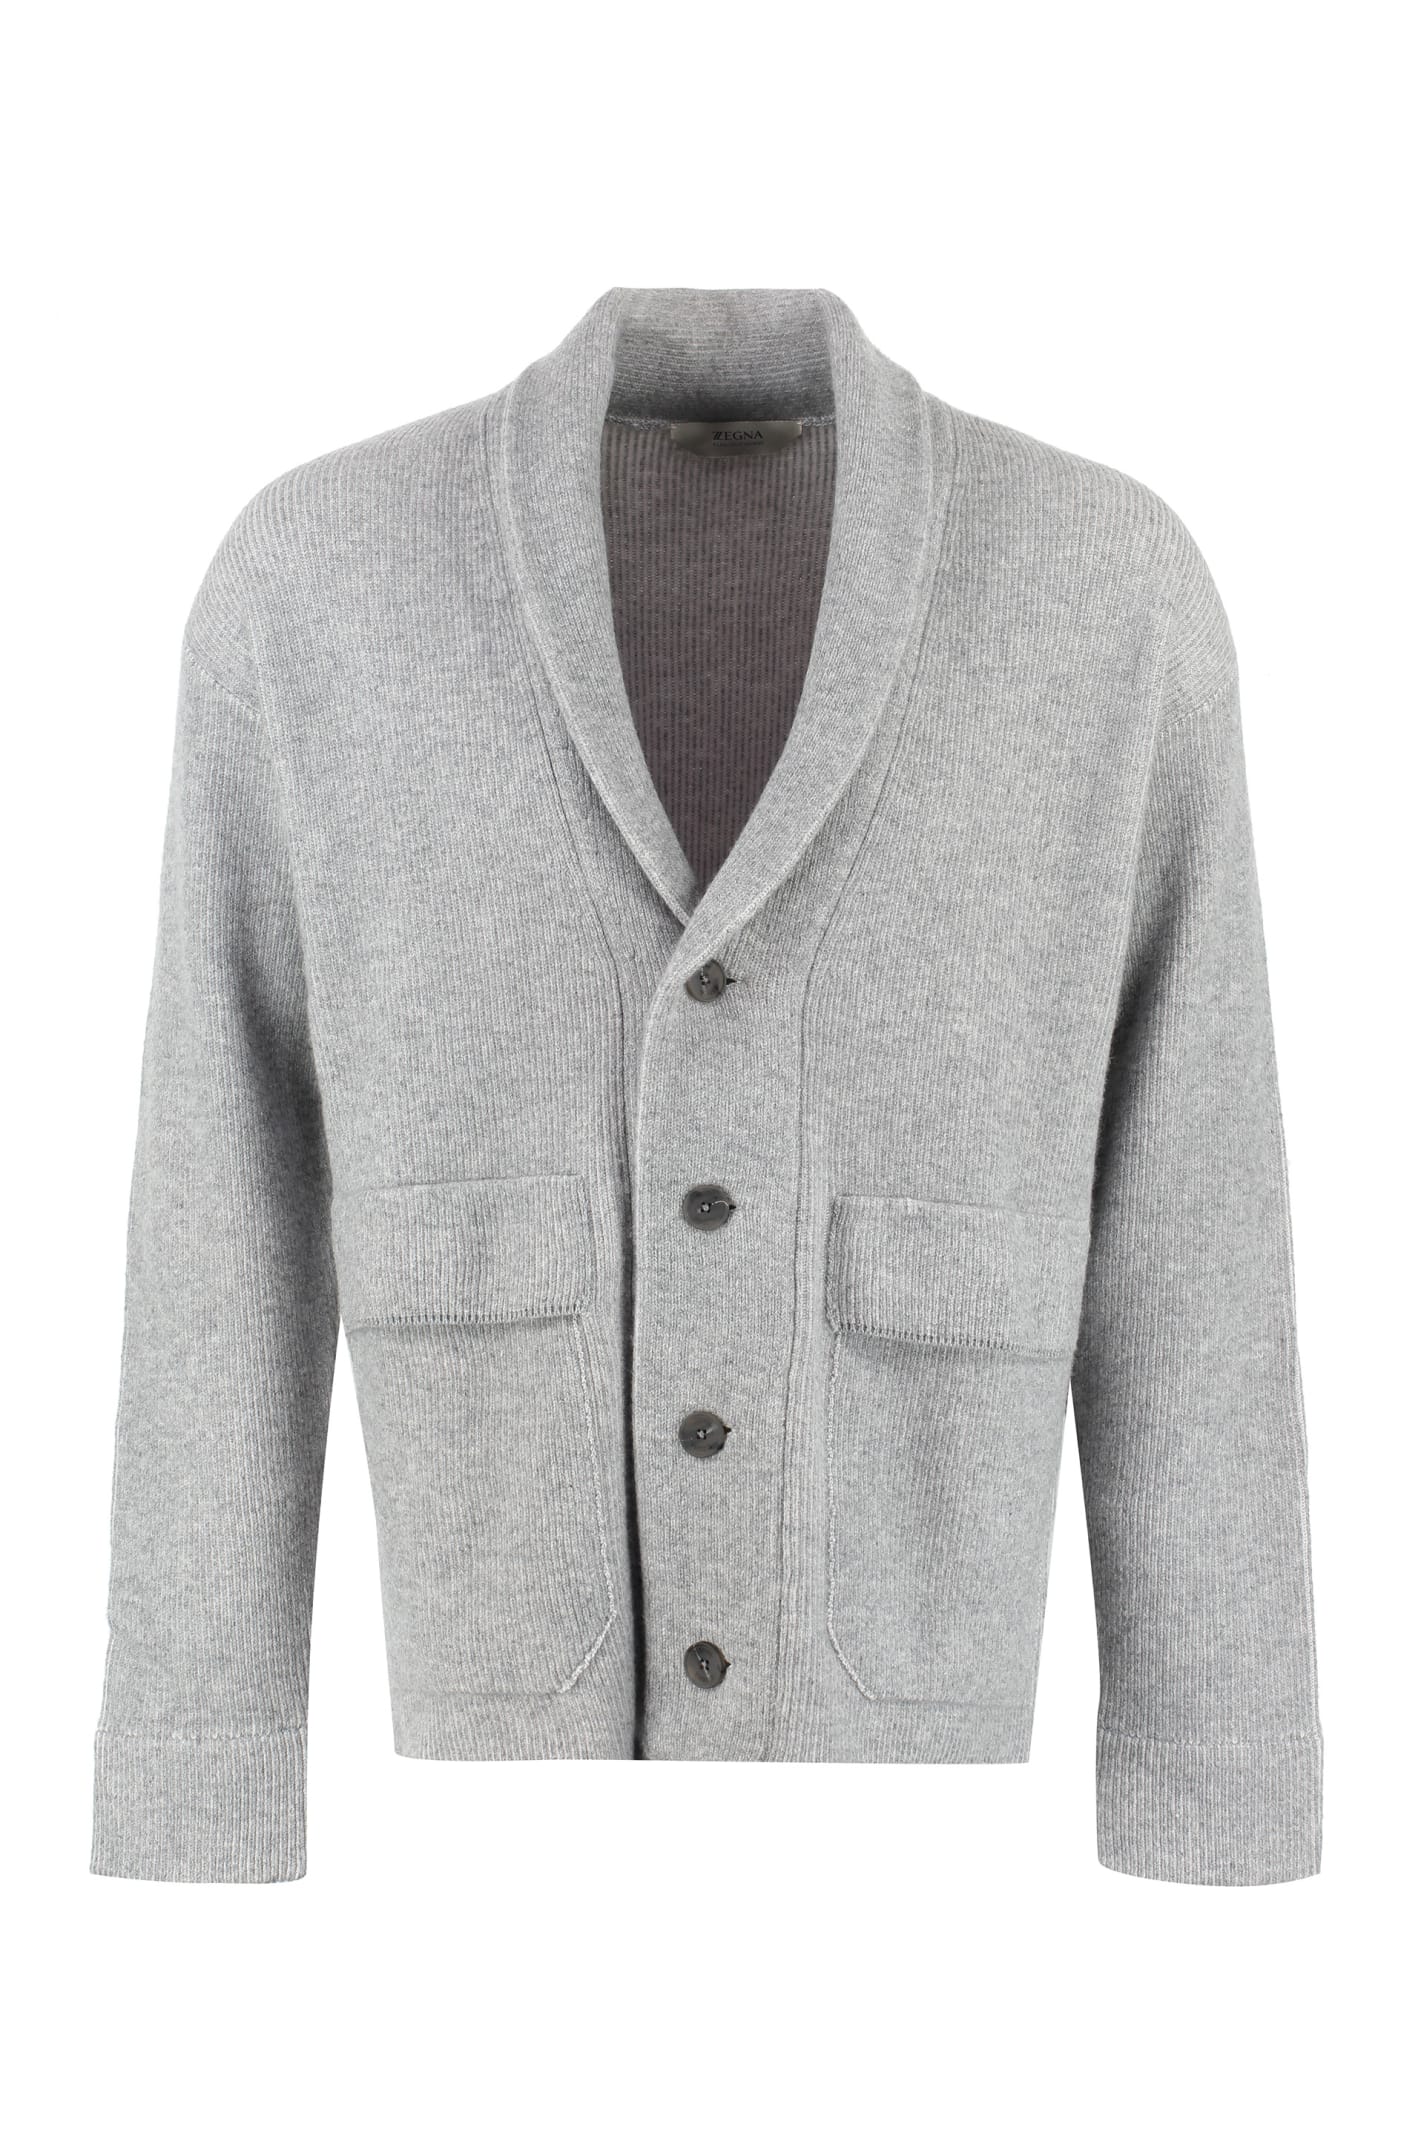 Z Zegna Wool And Cashmere Cardigan